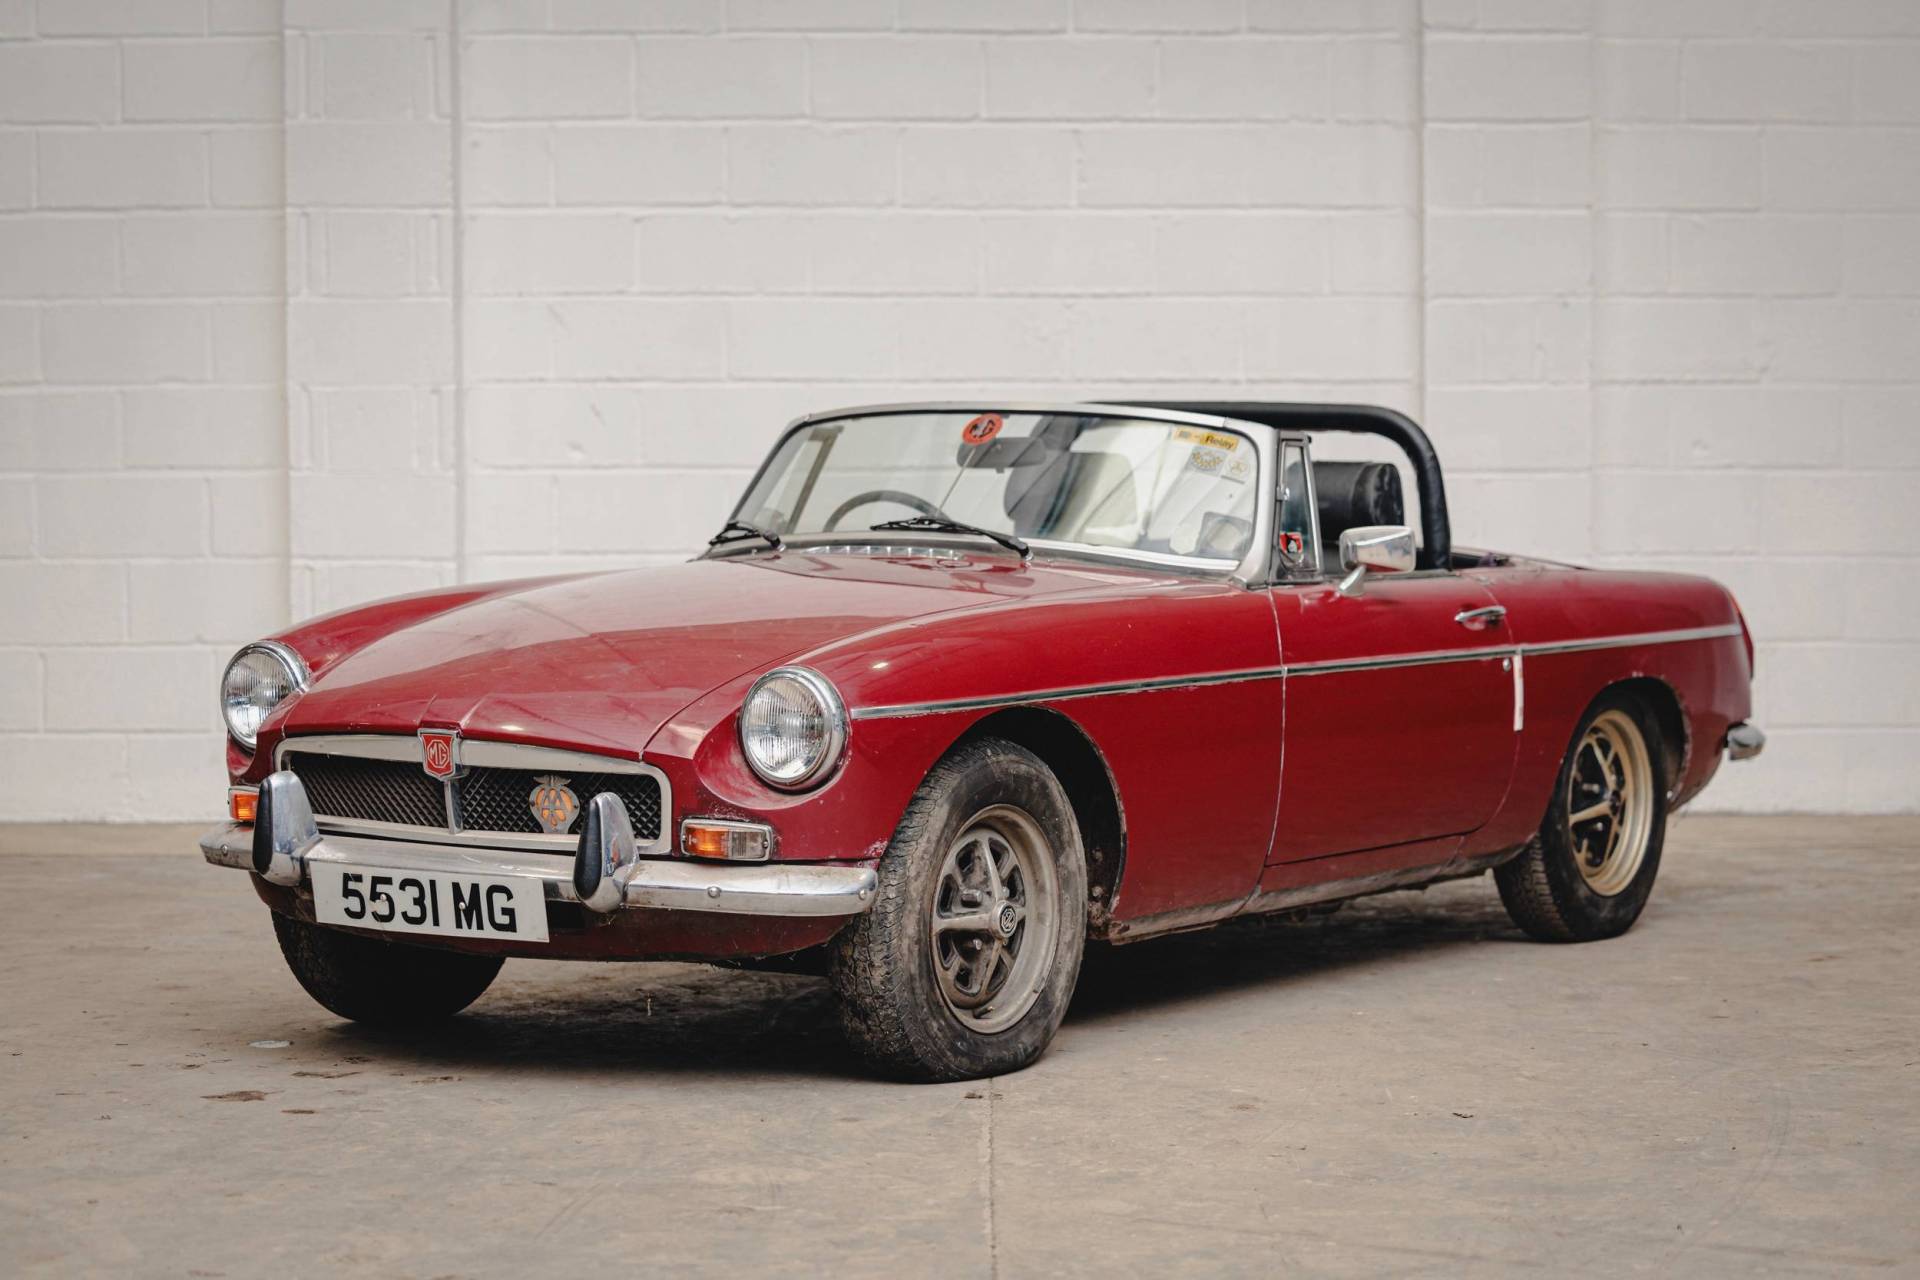 MG Classic Cars for Sale - Classic Trader